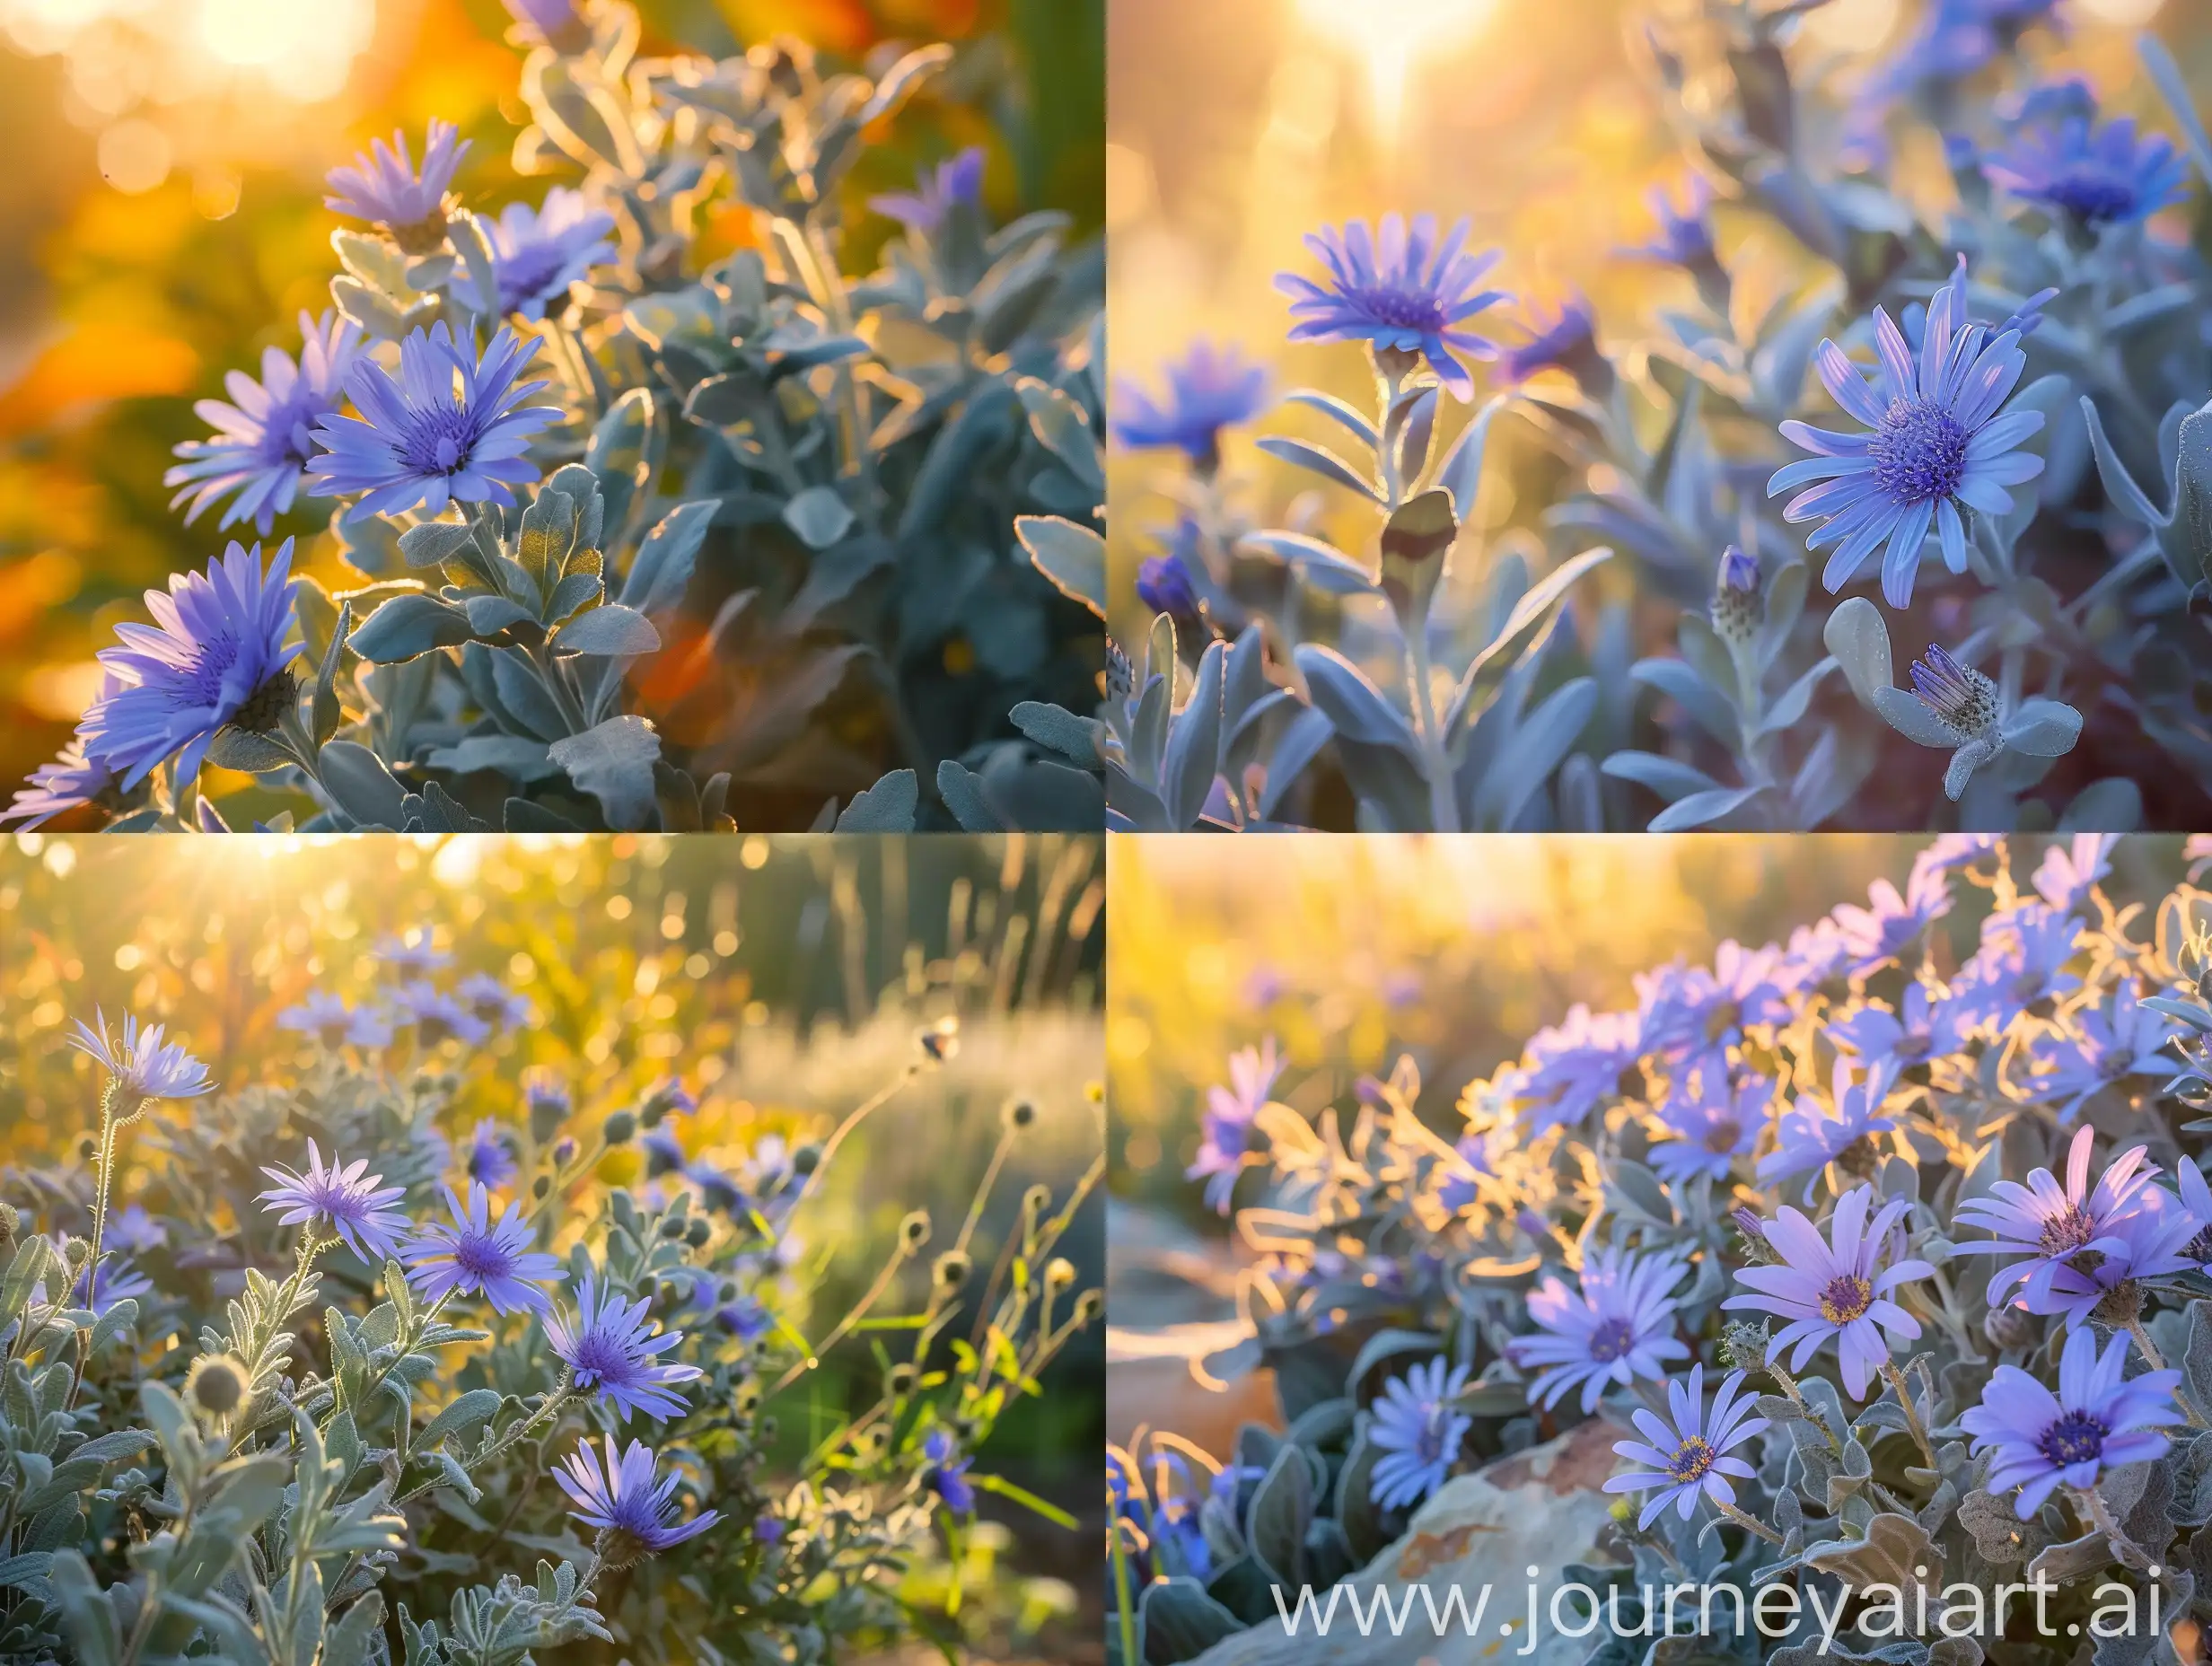 Close up high detailed photo capturing a Aster, Raydon's Favorite. The sun, casting a warm, golden glow, bathes the scene in a serene ambiance, illuminating the intricate details of each element. The composition centers on a Aster, Raydon's Favorite. Hundreds of 1" daisy-like lavender blue flowers spring abundantly from the mounds of gray-green foliage. A perfectly gorgeous aster with aromatic leaves and visiting butterflies, the plants produce a splendid show in autumn. Easy to grow in full sun, with. The image evokes a sense of tranquility and natural beauty, inviting viewers to immerse themselves in the splendor of the landscape. --ar 16:9 